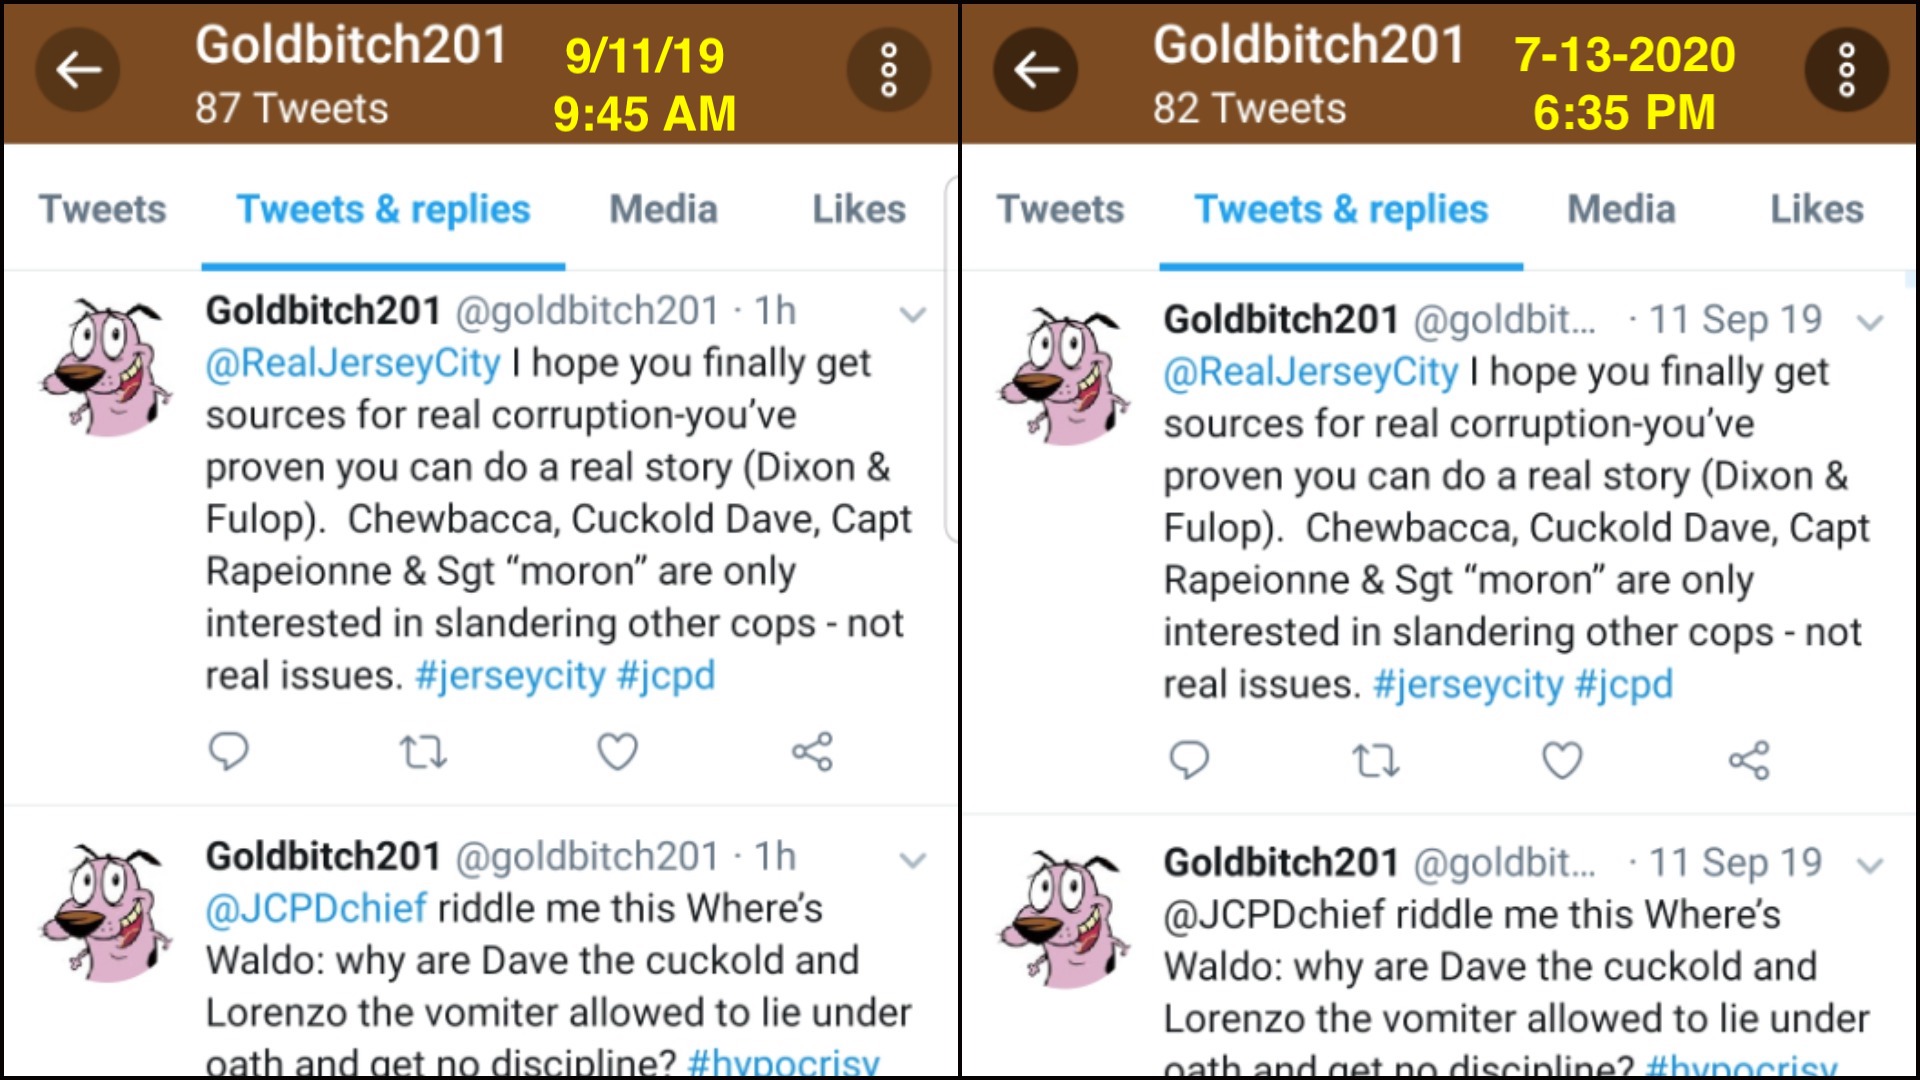 Two screenshots of Goldbitch201 indicate at least five tweets posted prior to September 11, 2019, were deleted.